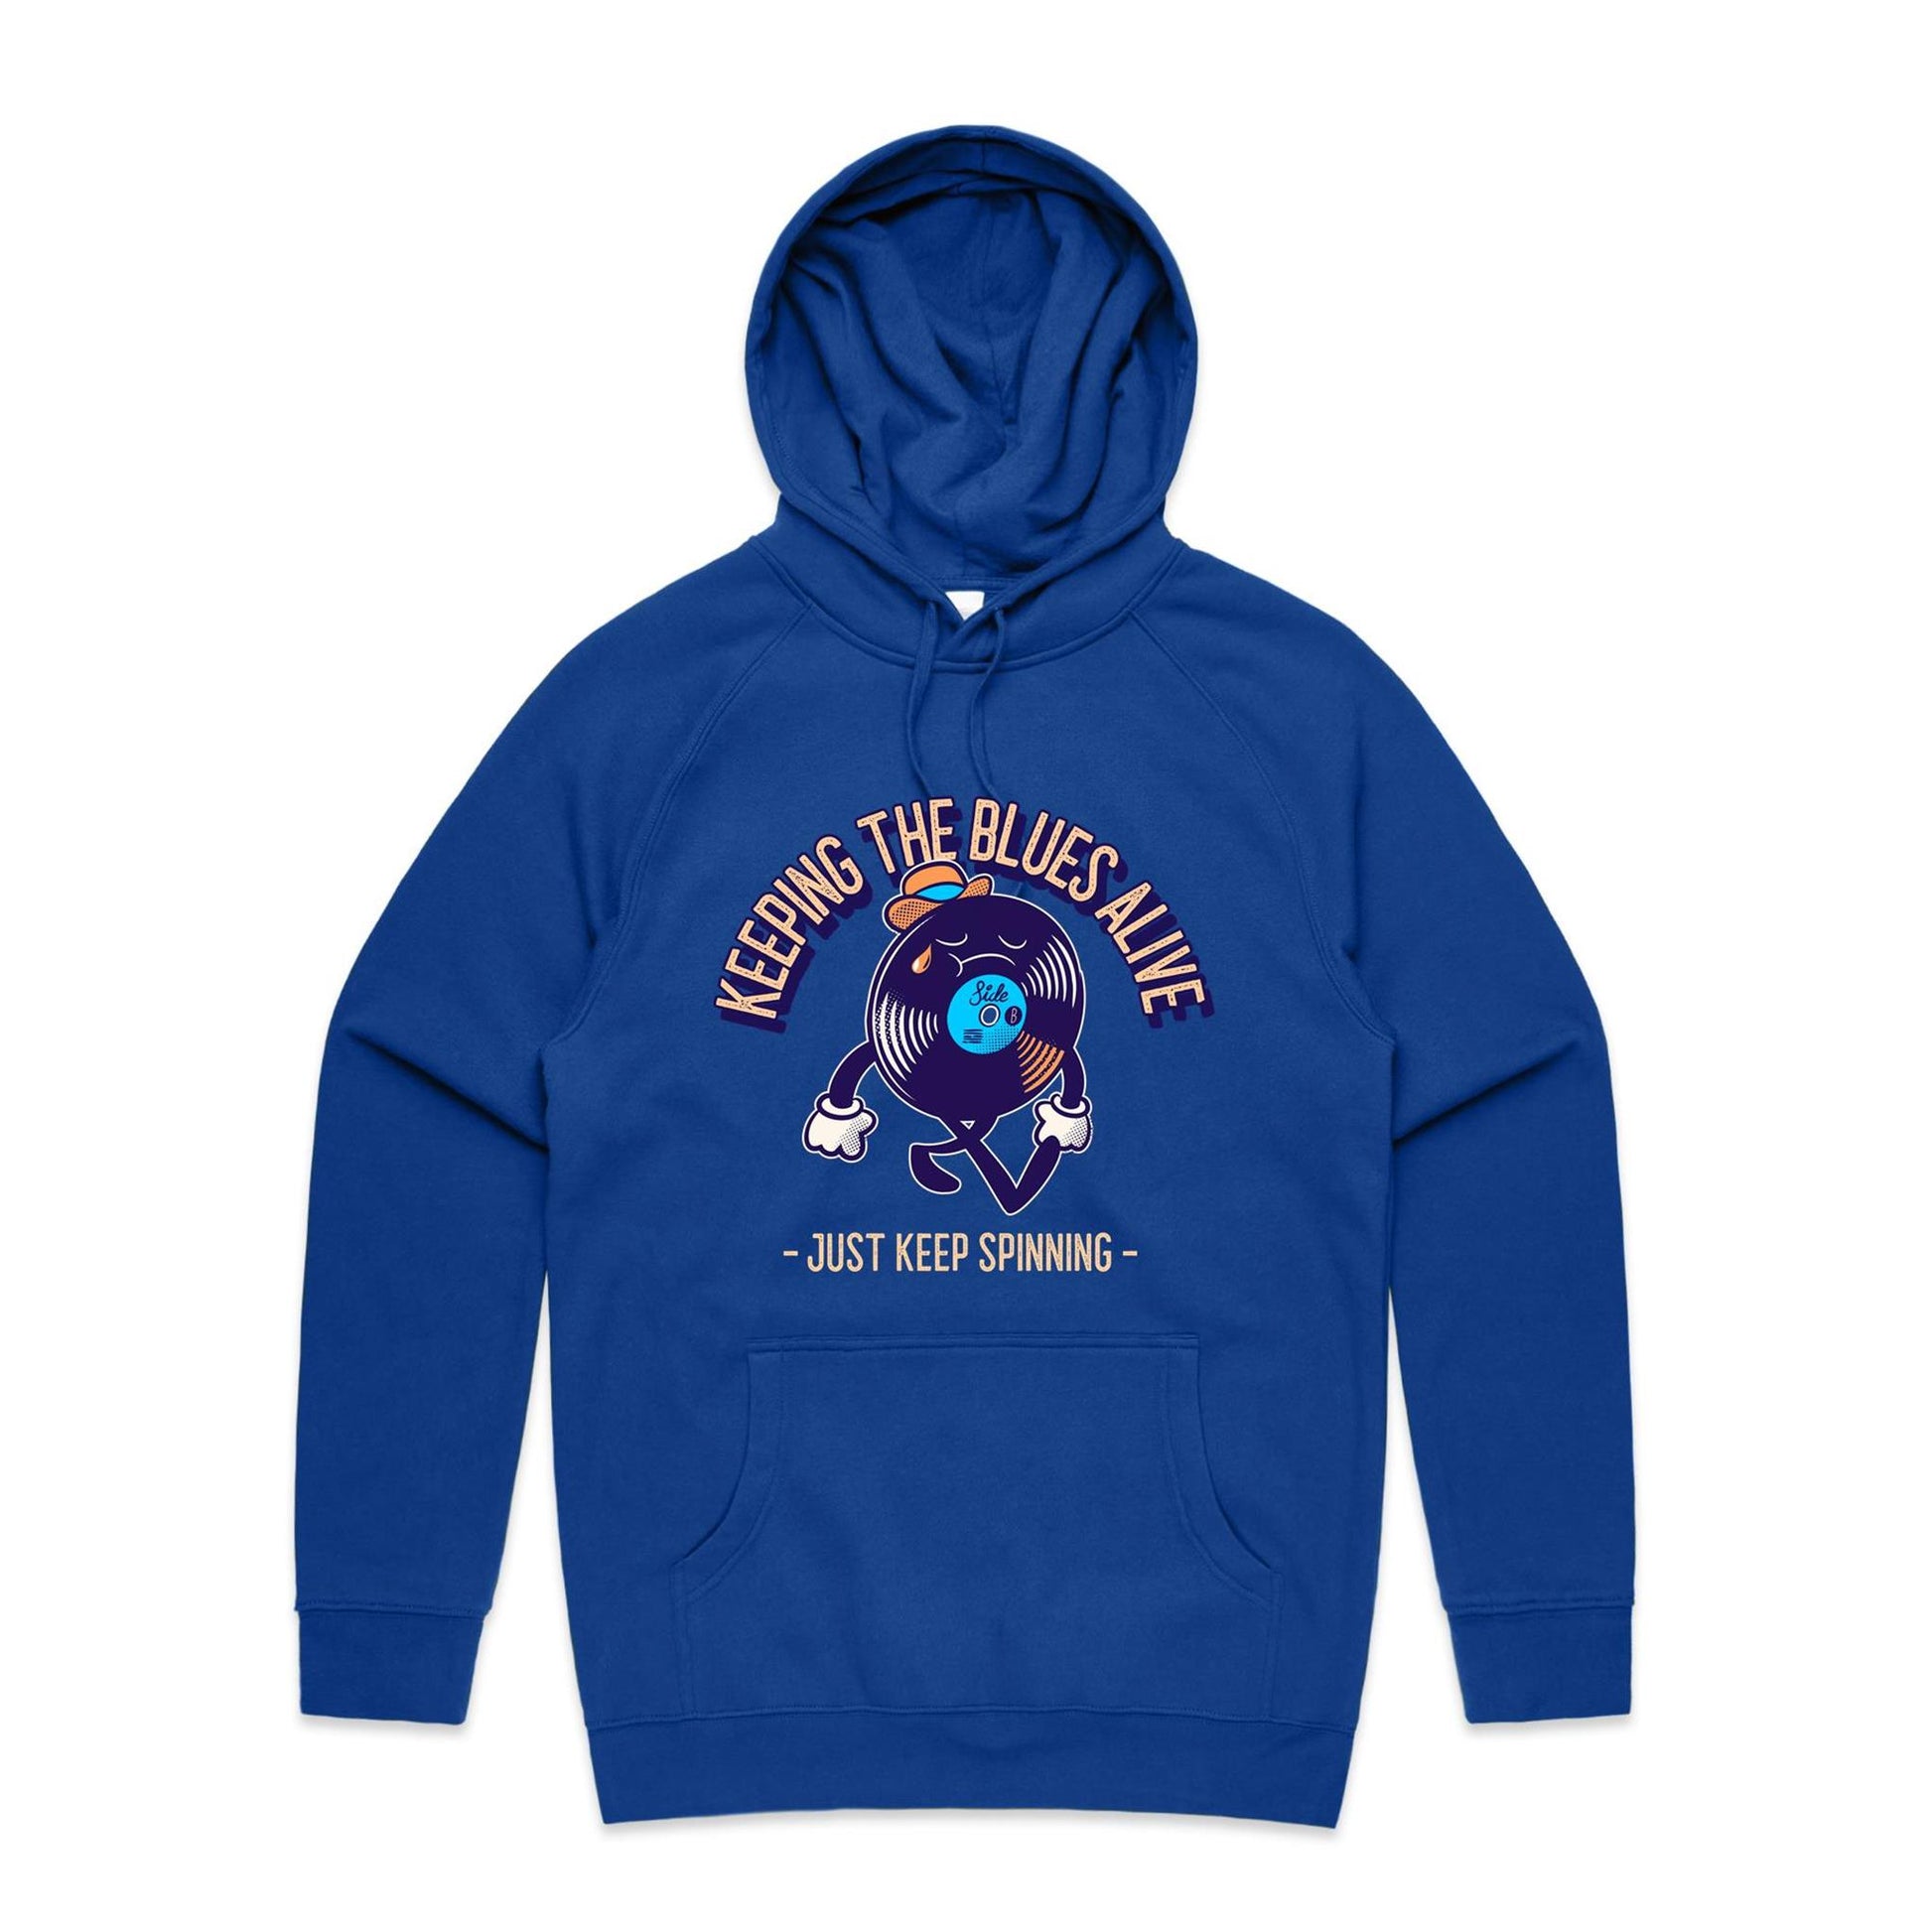 Keeping The Blues Alive - Supply Hood Bright Royal Mens Supply Hoodie Music